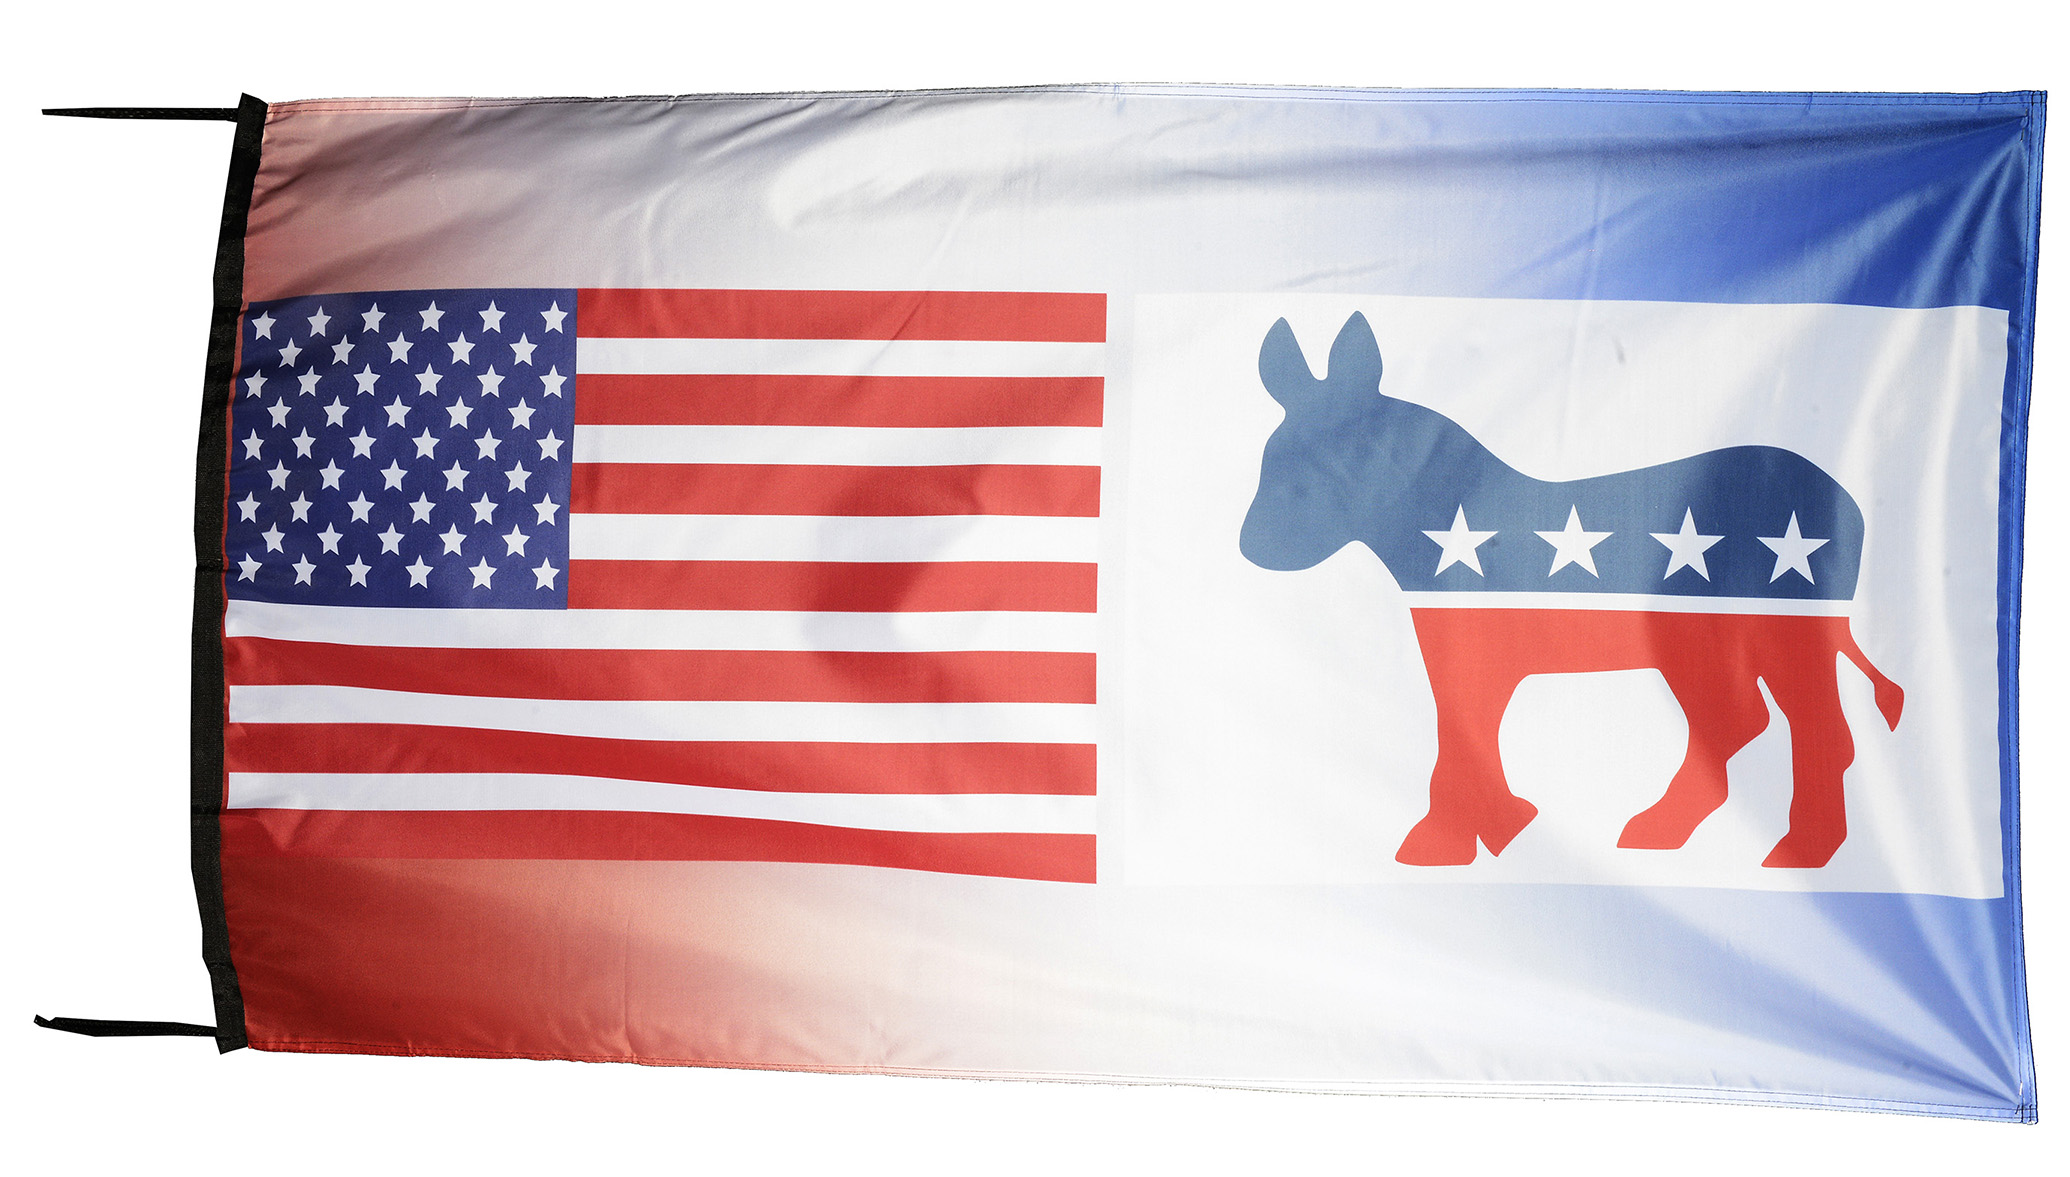 Flag  076 USA / US Country / United States Of America and Donald Trump For President 2024 / Presidential / Democrats / Republicans / Elections / Politics / Pride Hybrid Weather-Resistant Polyester Outdoor Flag Landscape Banner / Vivid Colors / 3 X 5 FT (150 x 90cm) International Flags for Sale